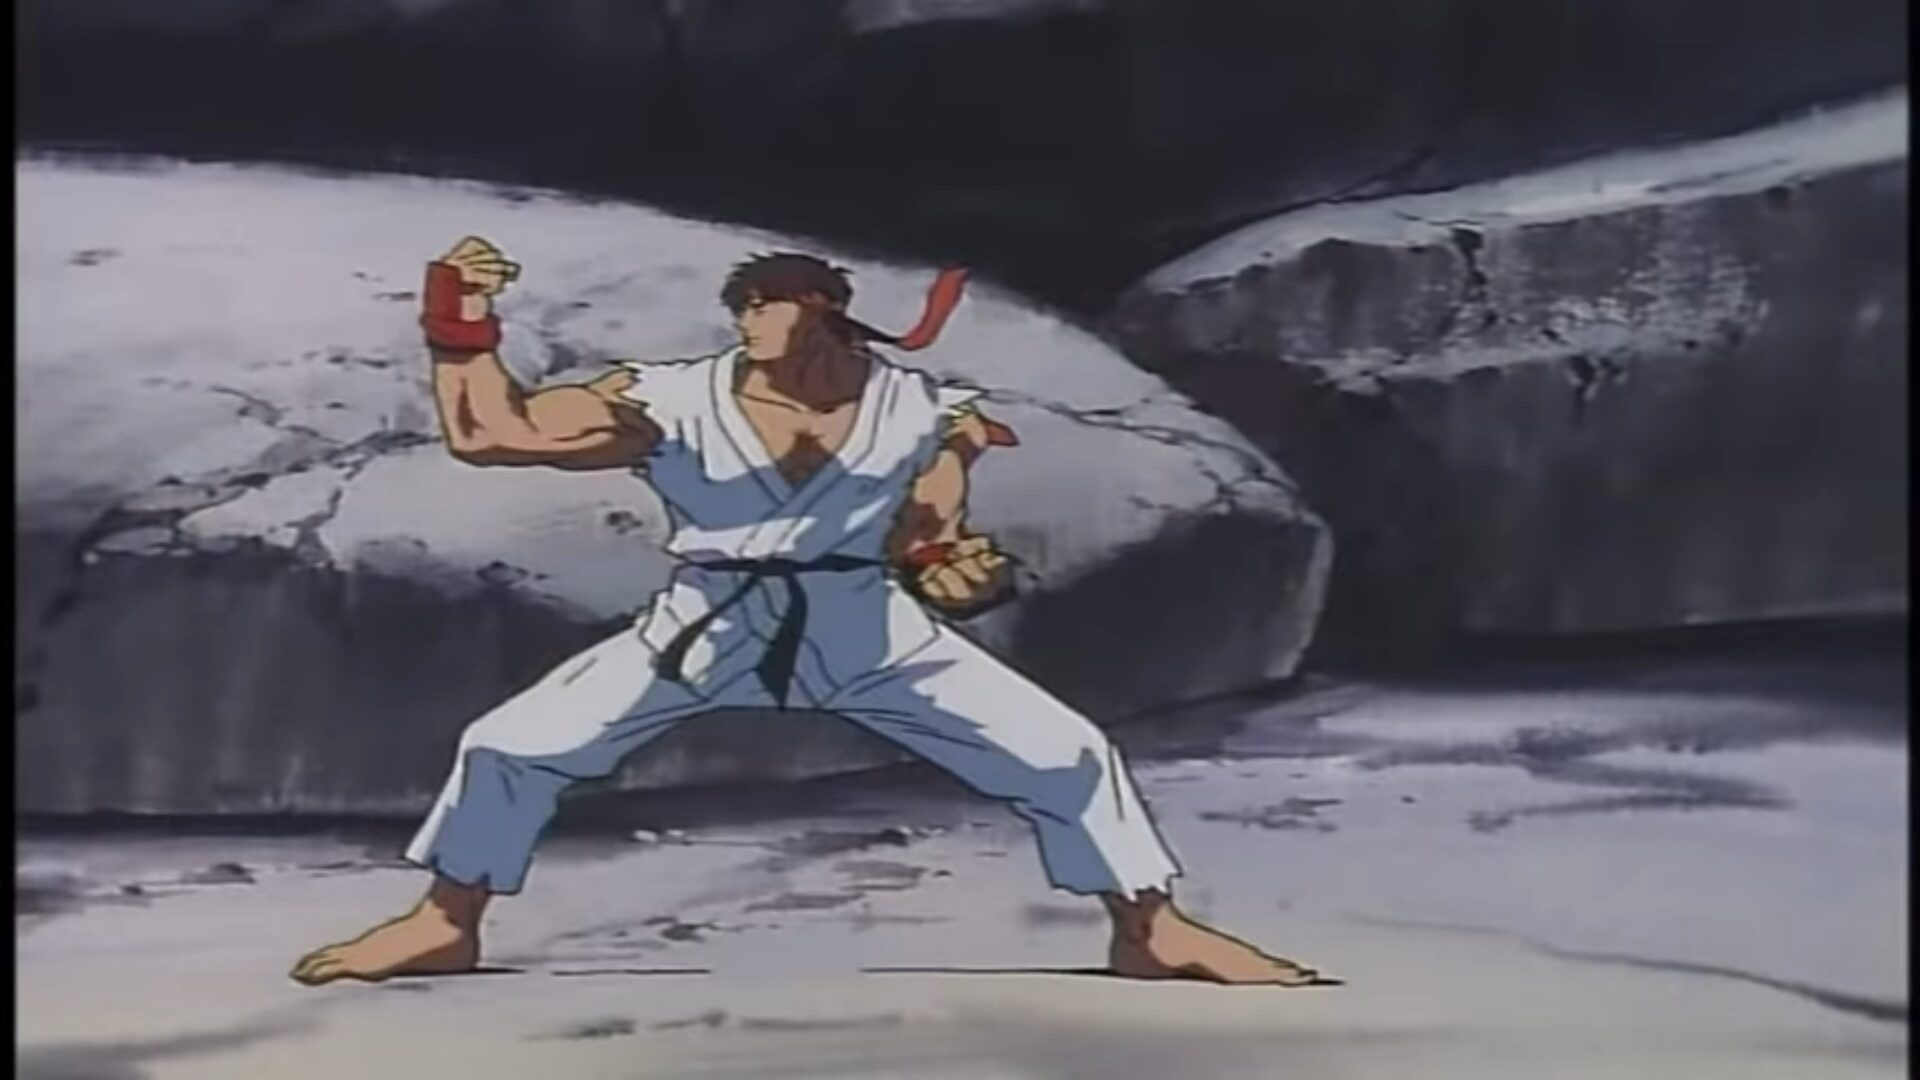 Rare Street Fighter II Anime Translated Into English After 20+ Years